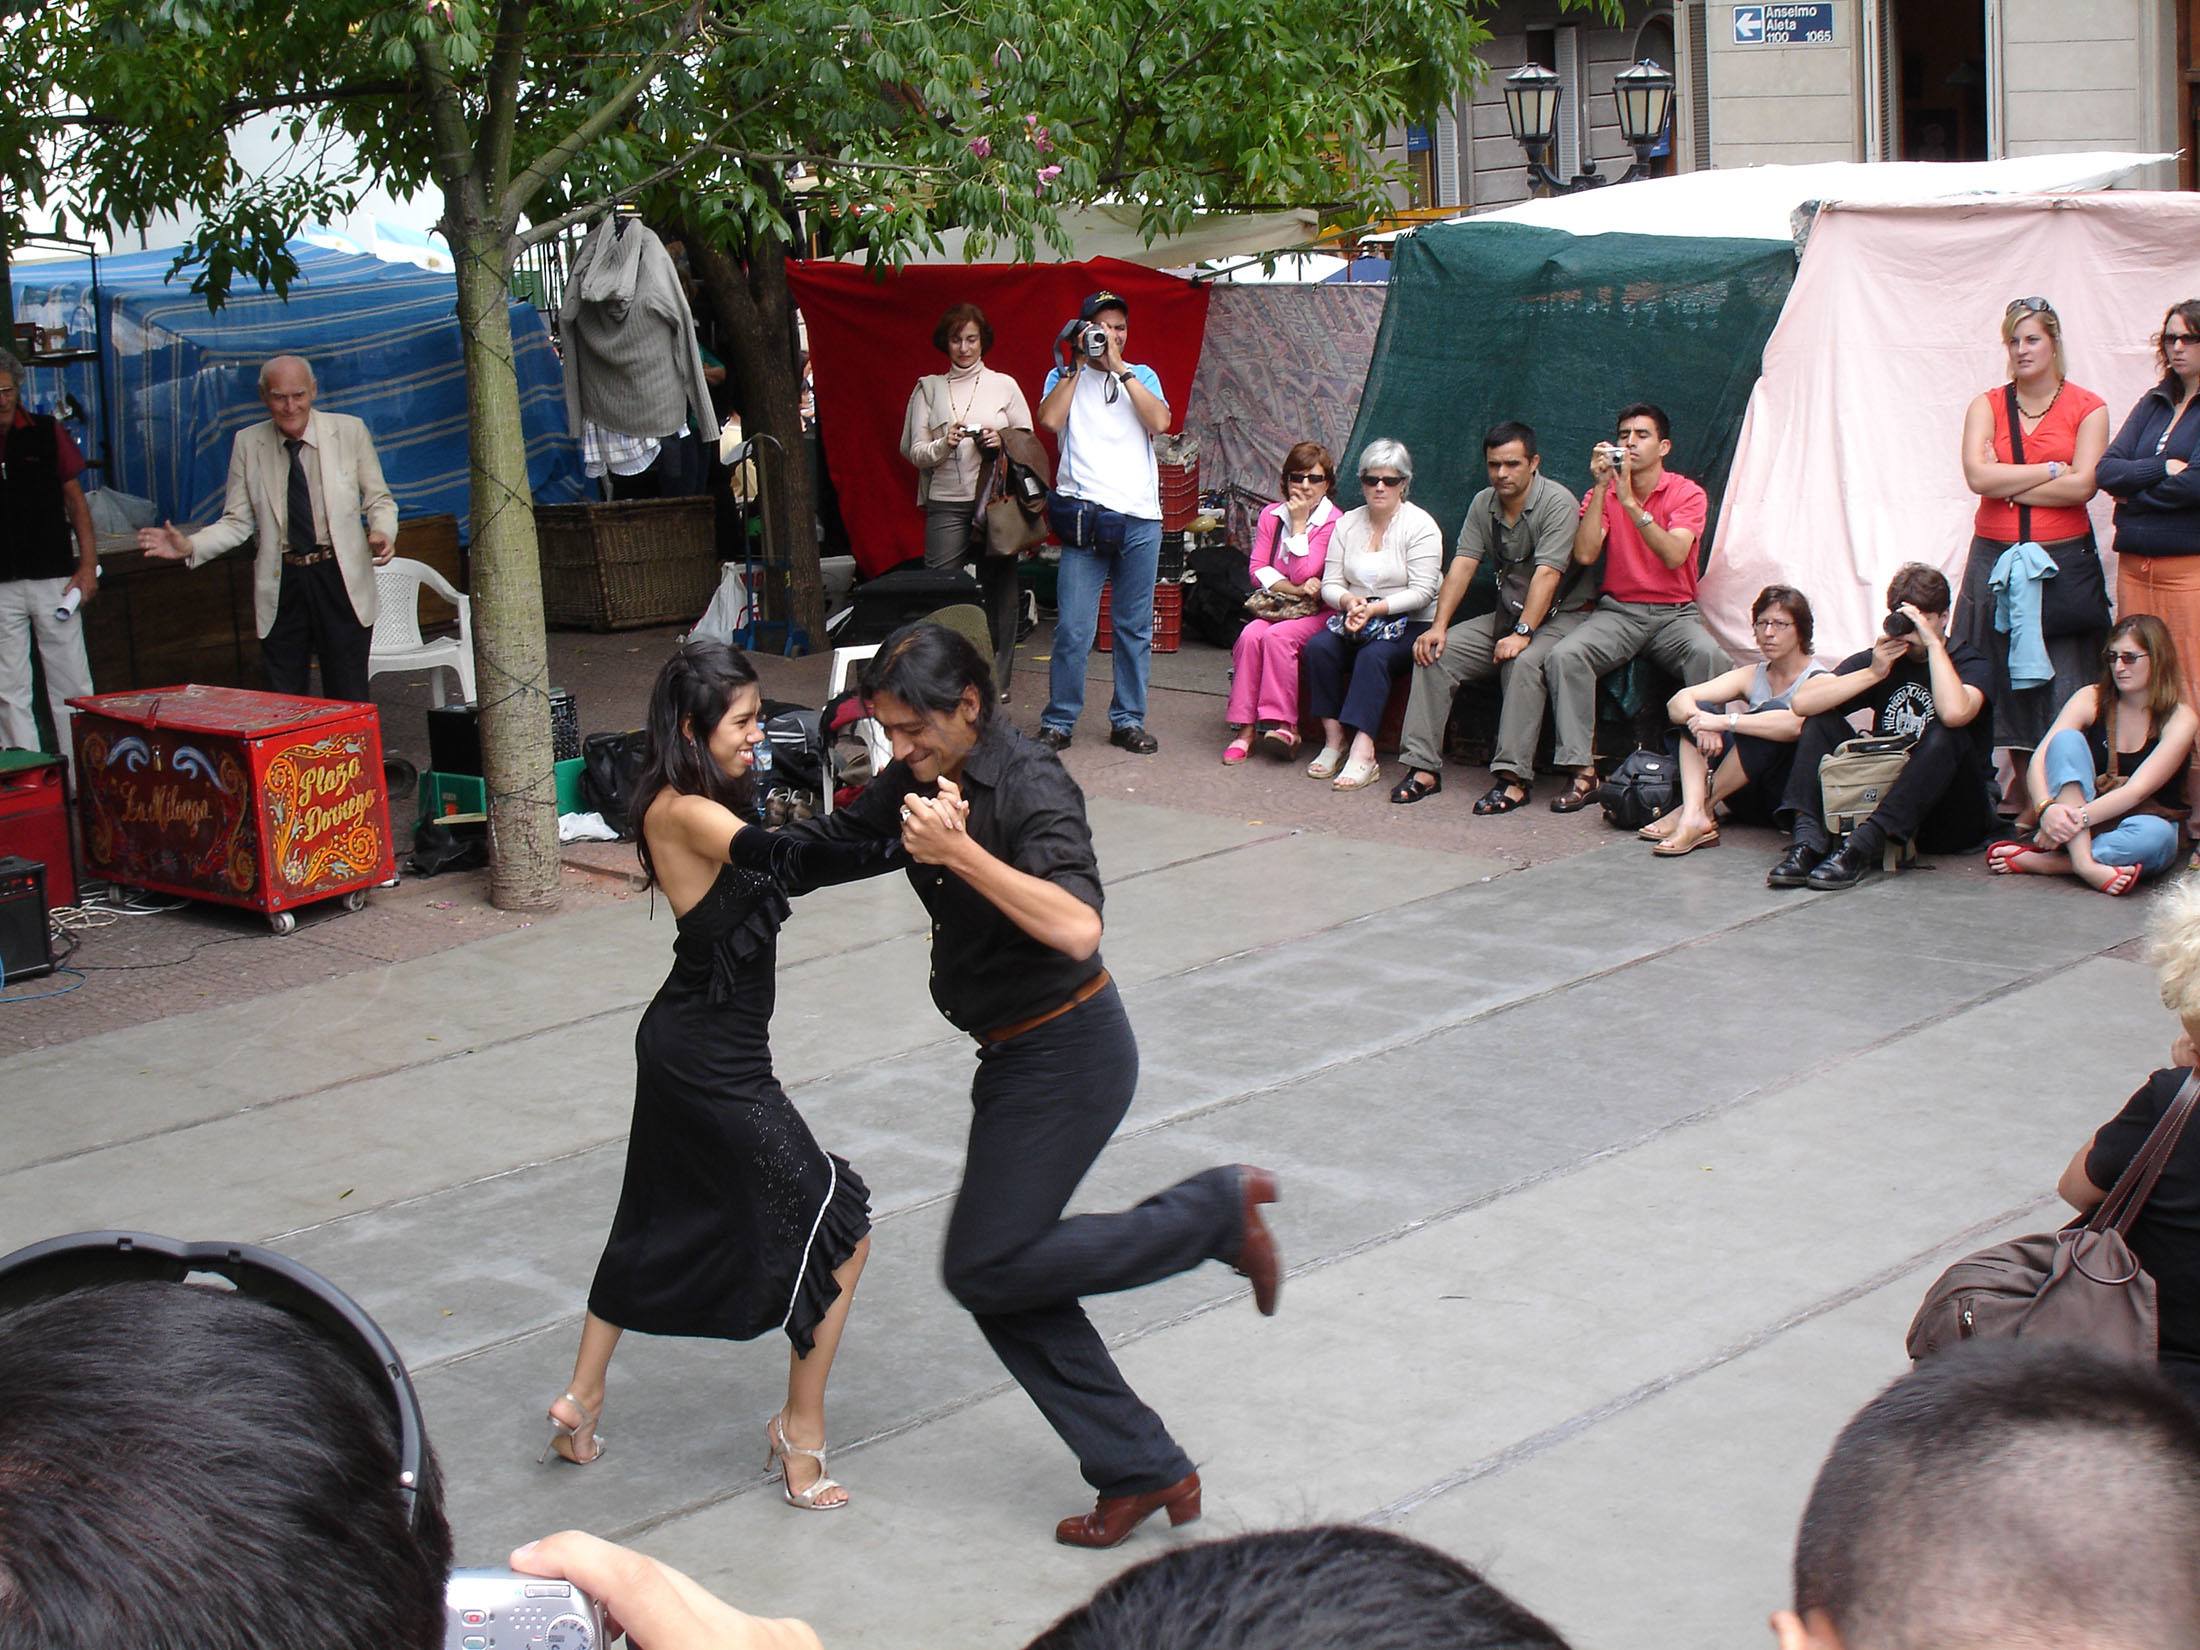 Dancers in the streets of Buenos Aires performing the Argentine Tango